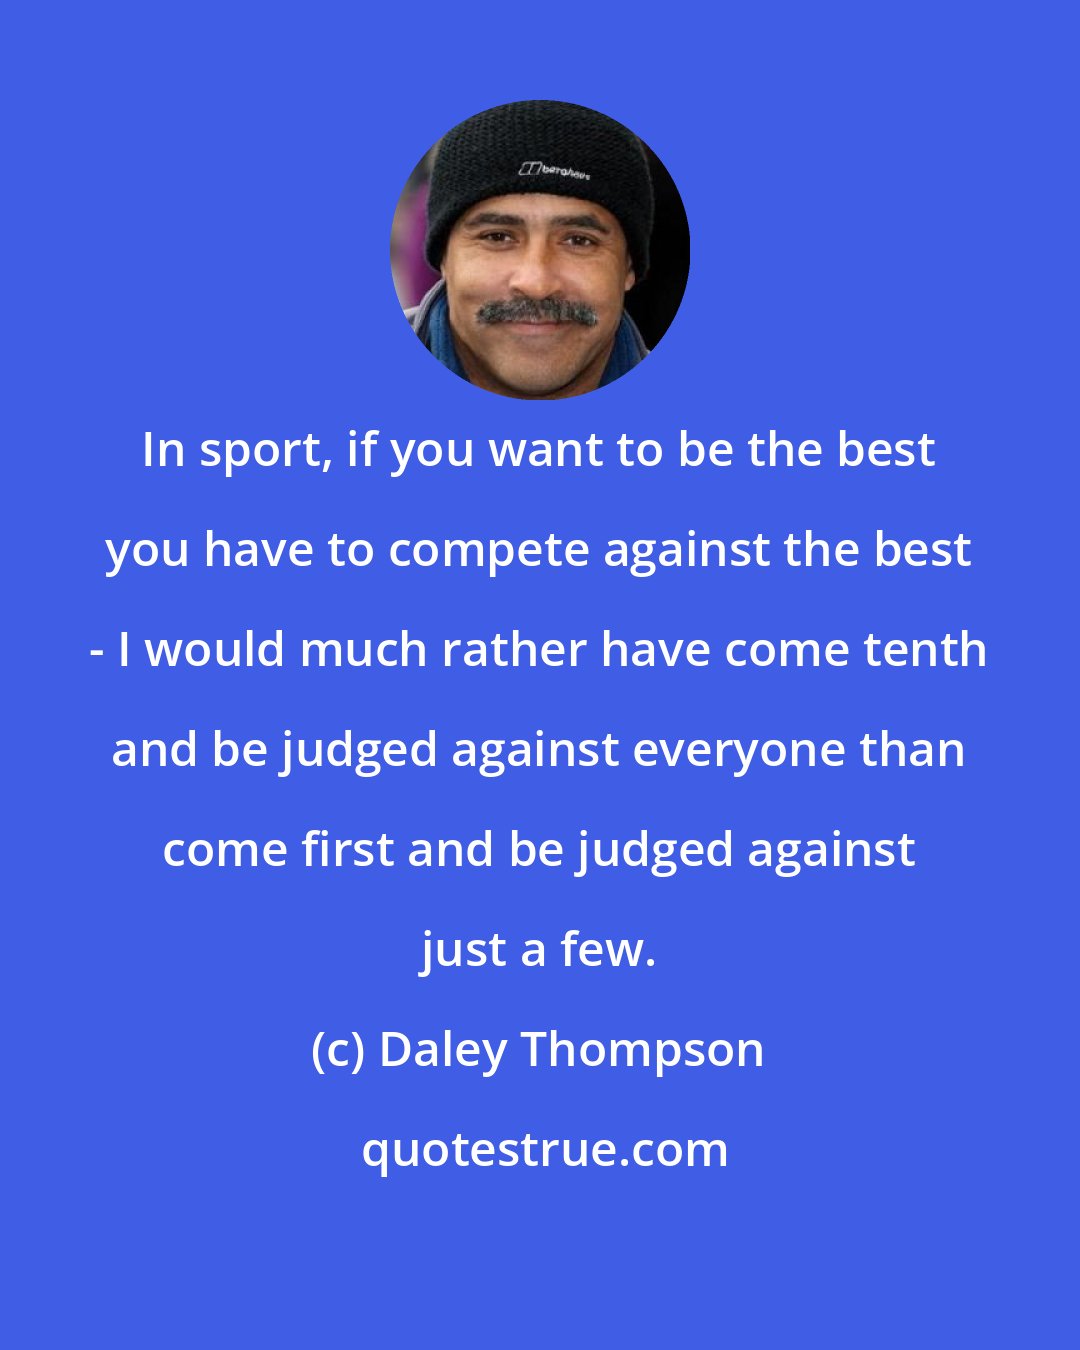 Daley Thompson: In sport, if you want to be the best you have to compete against the best - I would much rather have come tenth and be judged against everyone than come first and be judged against just a few.